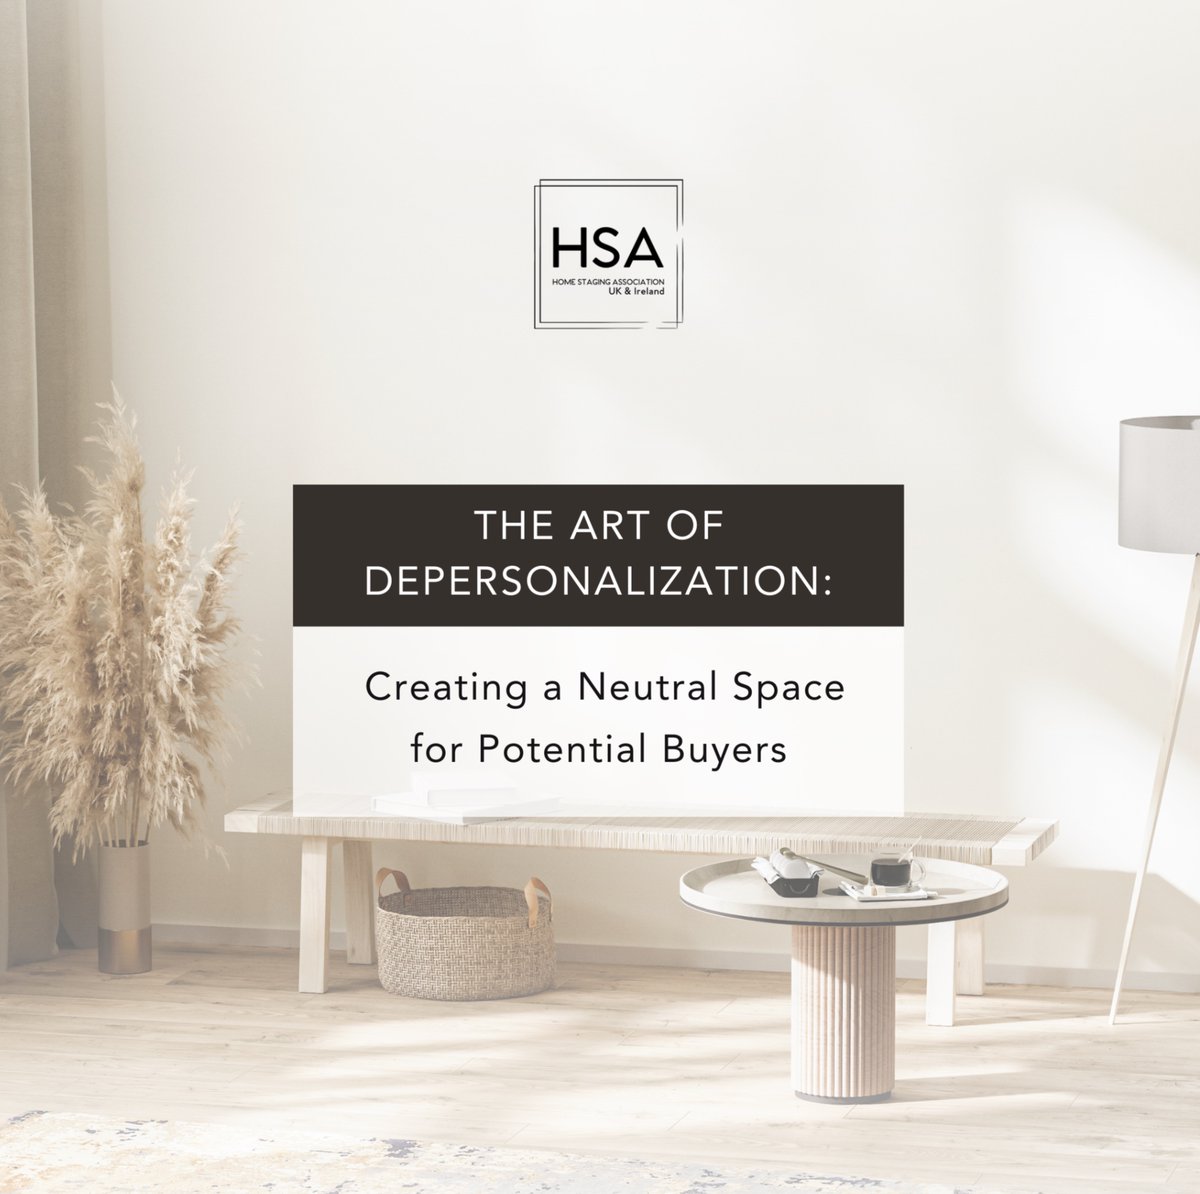 Transforming a house into a neutral canvas is key in appealing to a wide range of potential buyers. Visit our FB and IG pages to see our tips!

#homestagingtips #homestagingbusiness #depersonalisation #neutralspace #homestaginguk #homestagingireland #hsauk